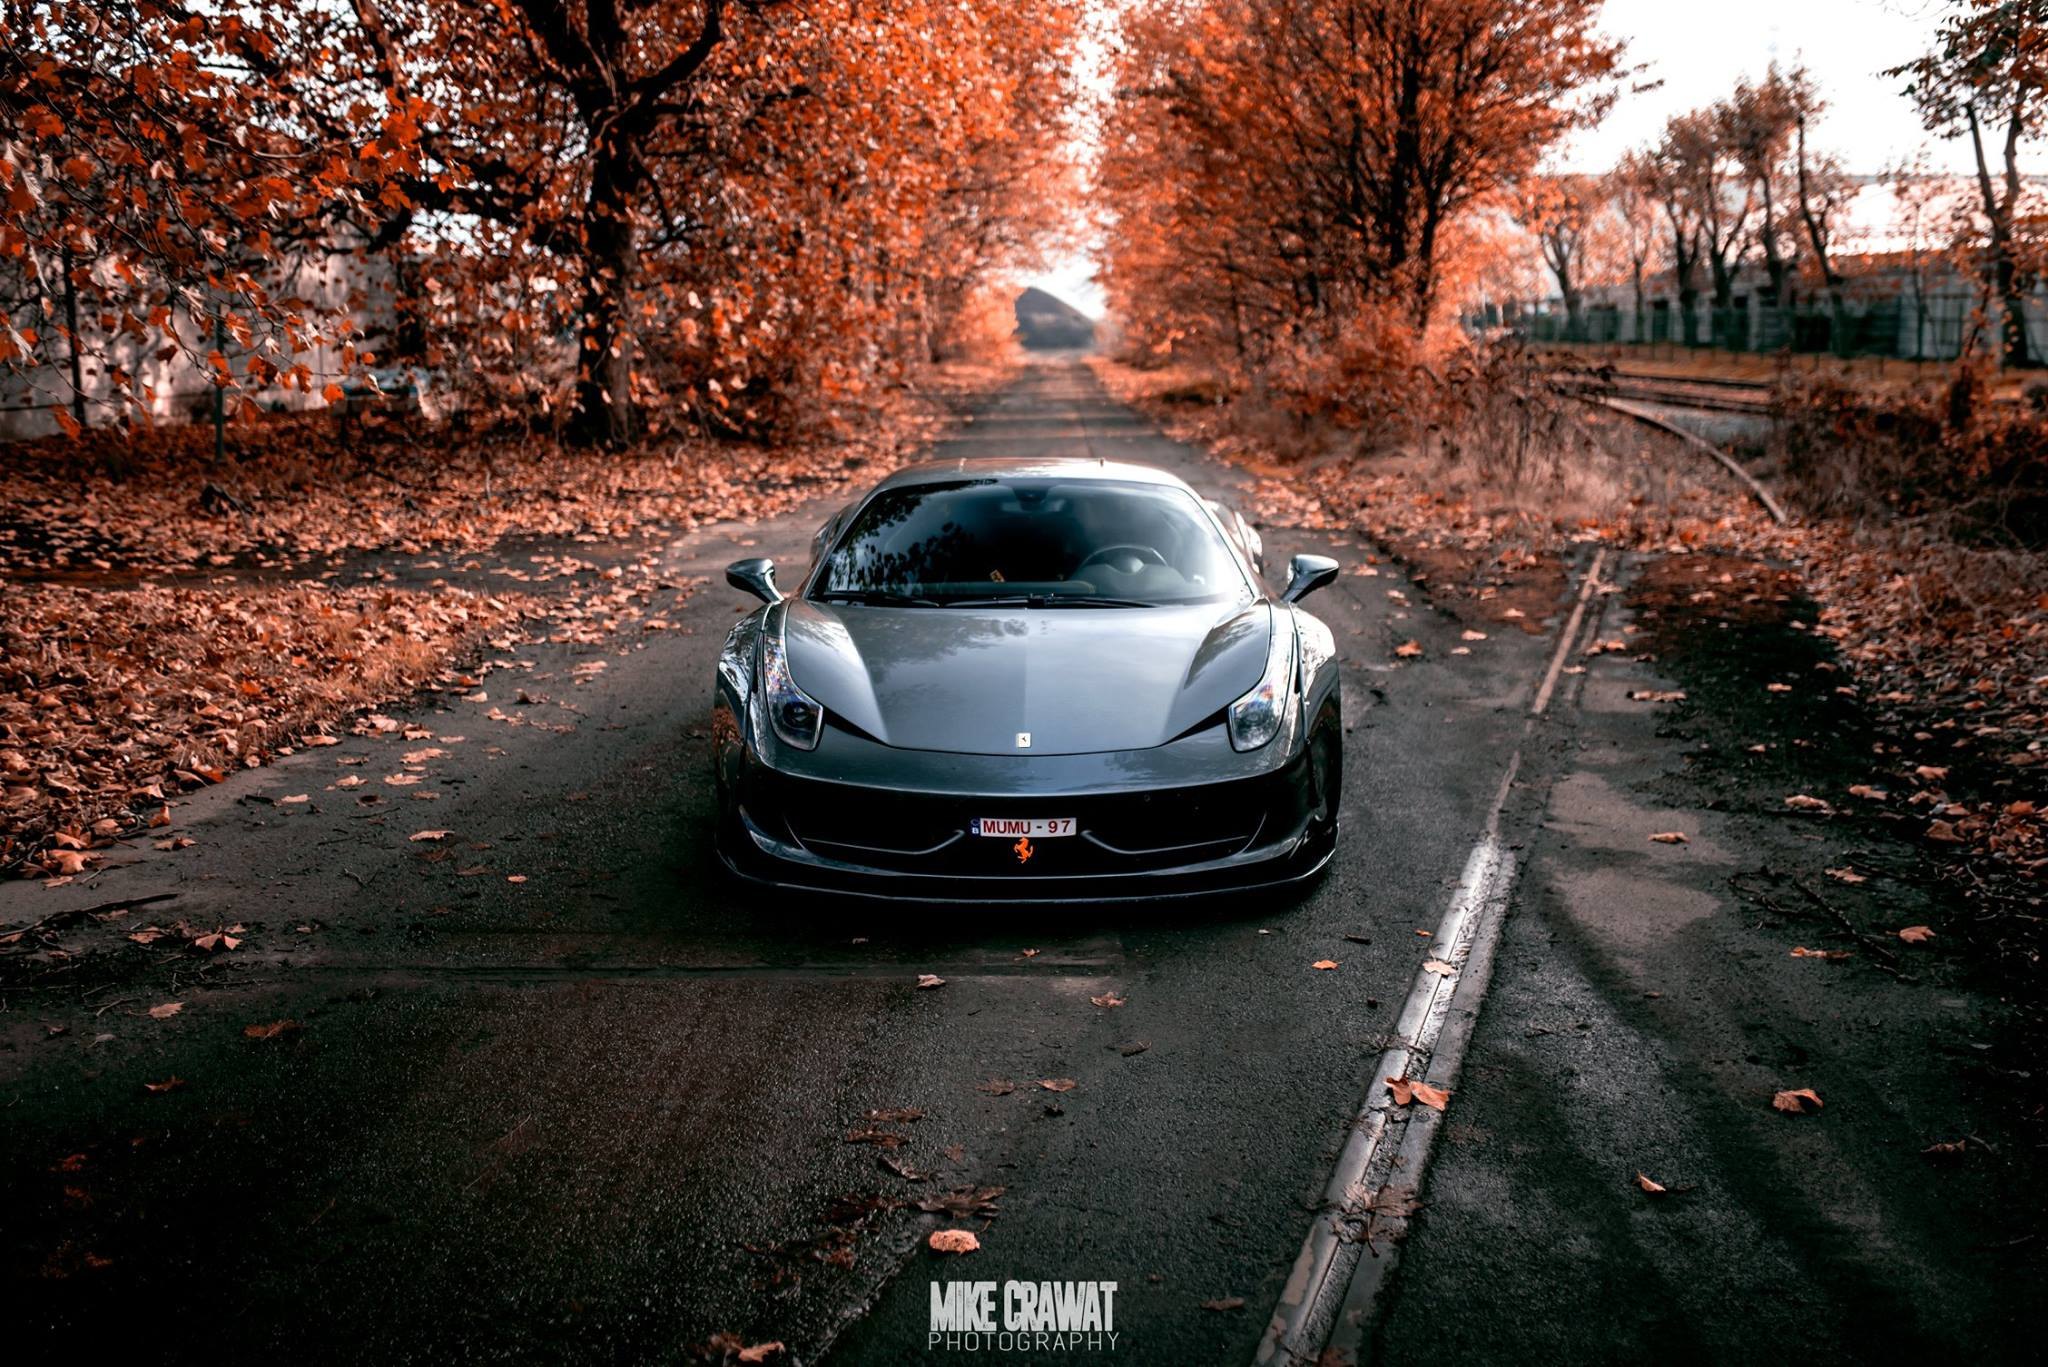 Gray Ferrari 458 with Aftermarket Front Bumper - Photo by Mike Crawat Photography